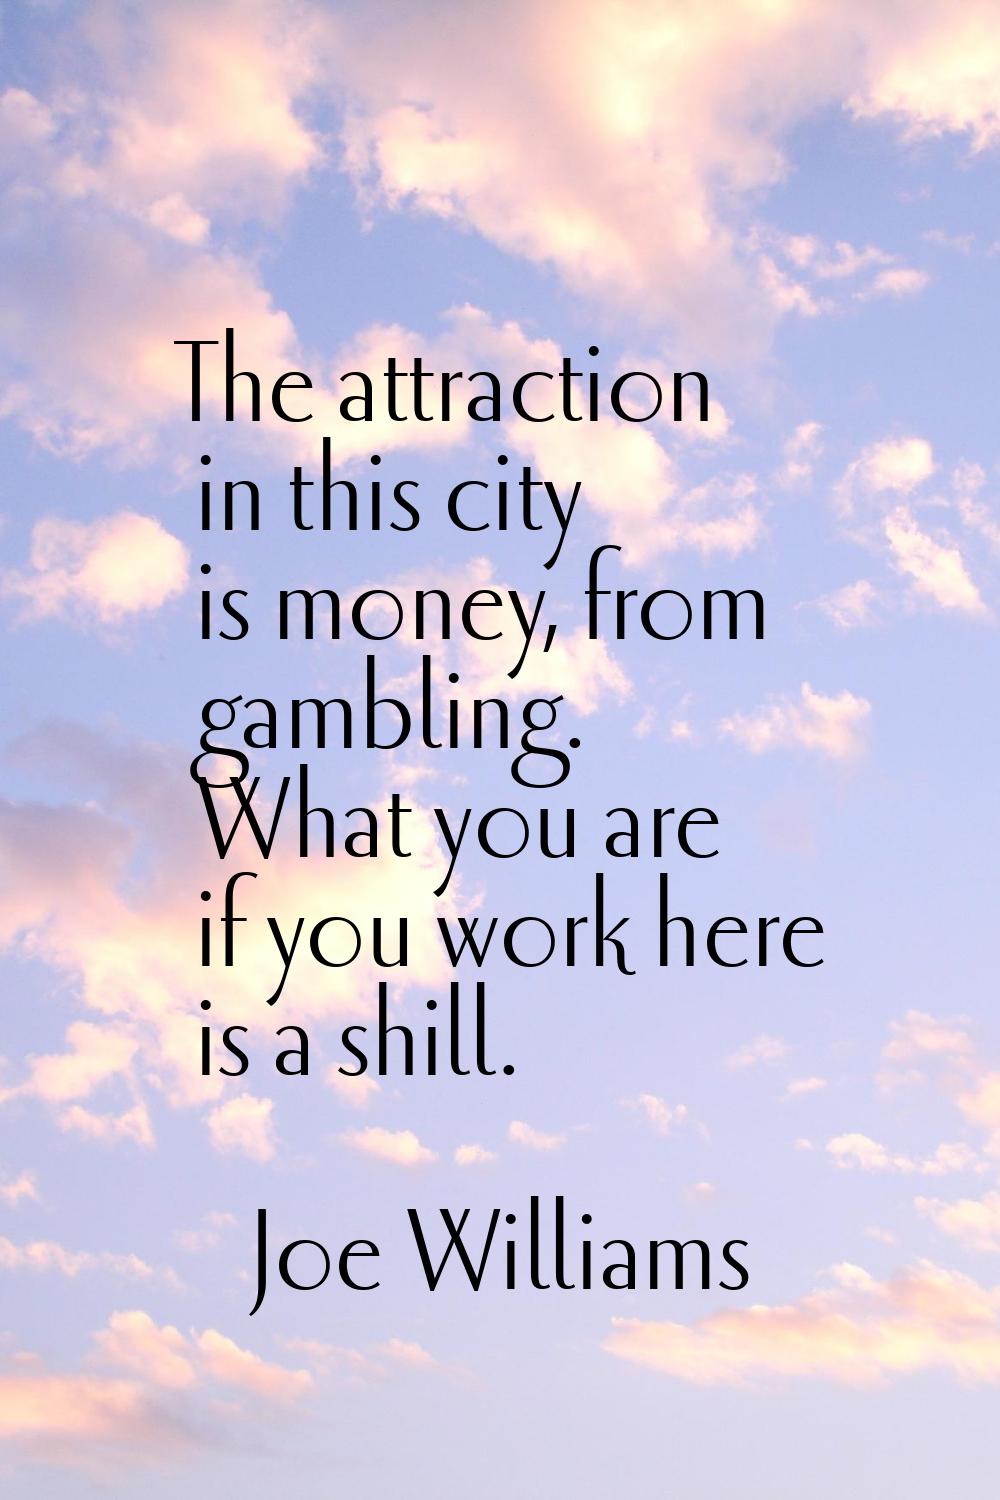 The attraction in this city is money, from gambling. What you are if you work here is a shill.